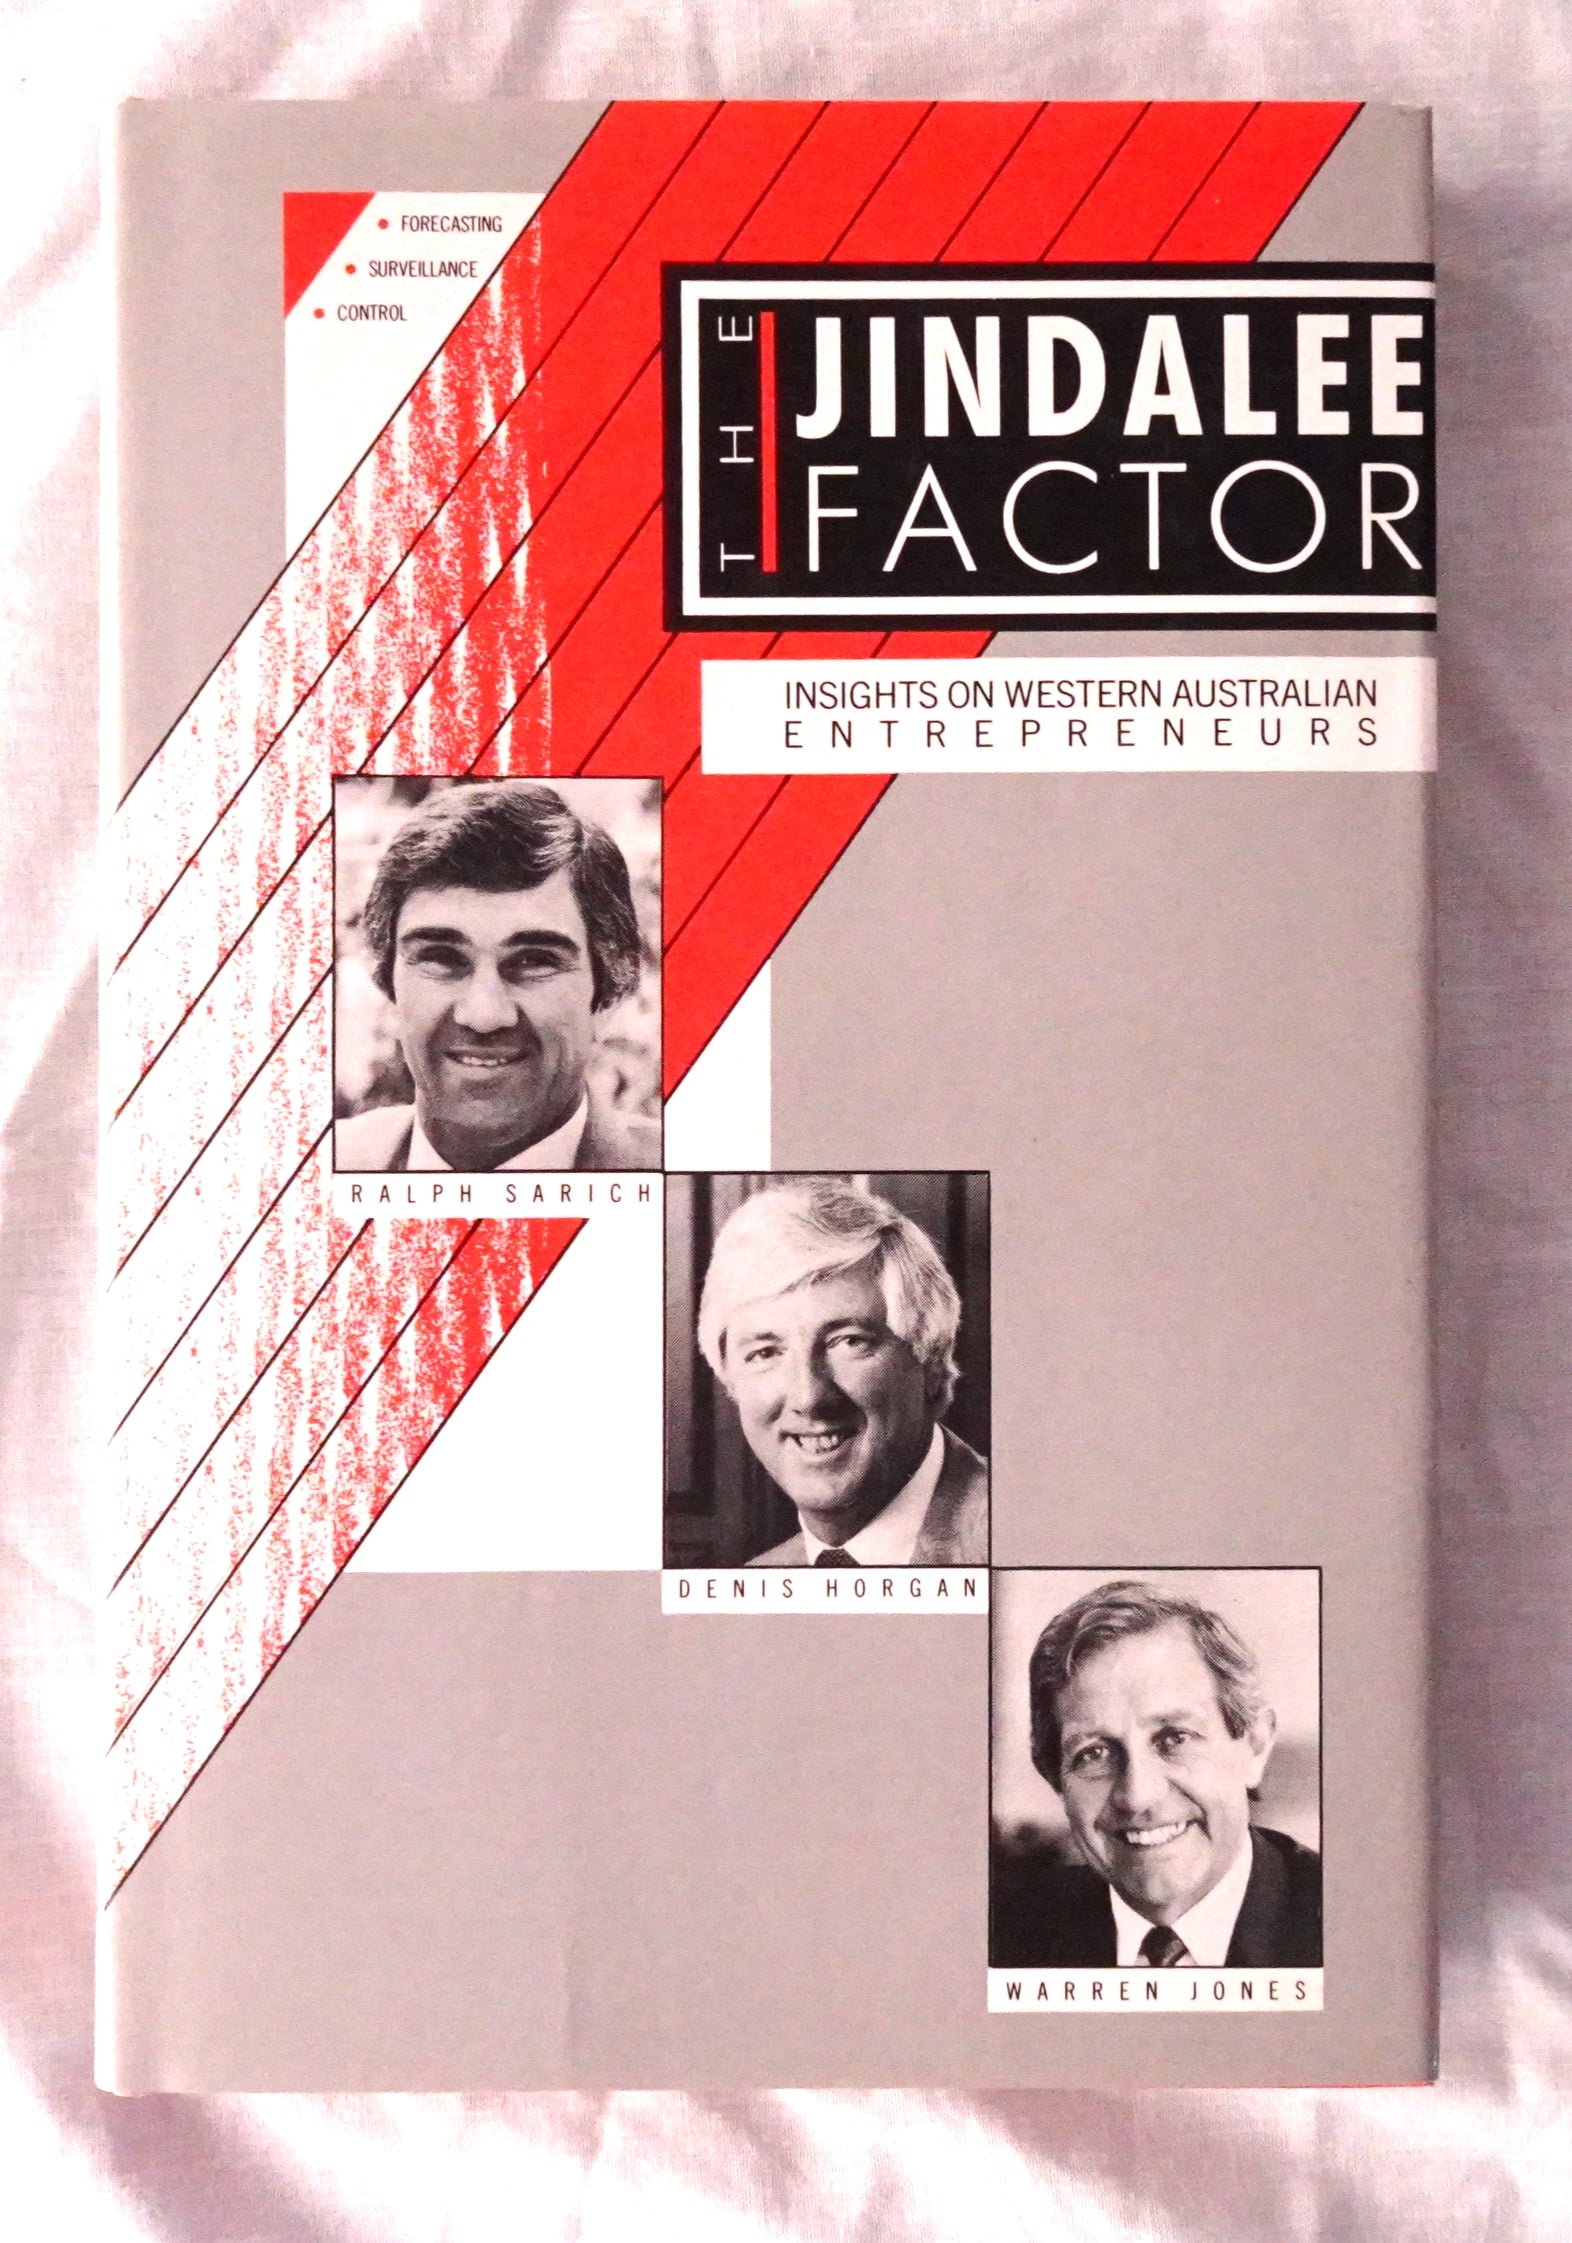 The Jindalee Factor  by Dr Roger Smith and Barry Urquhart